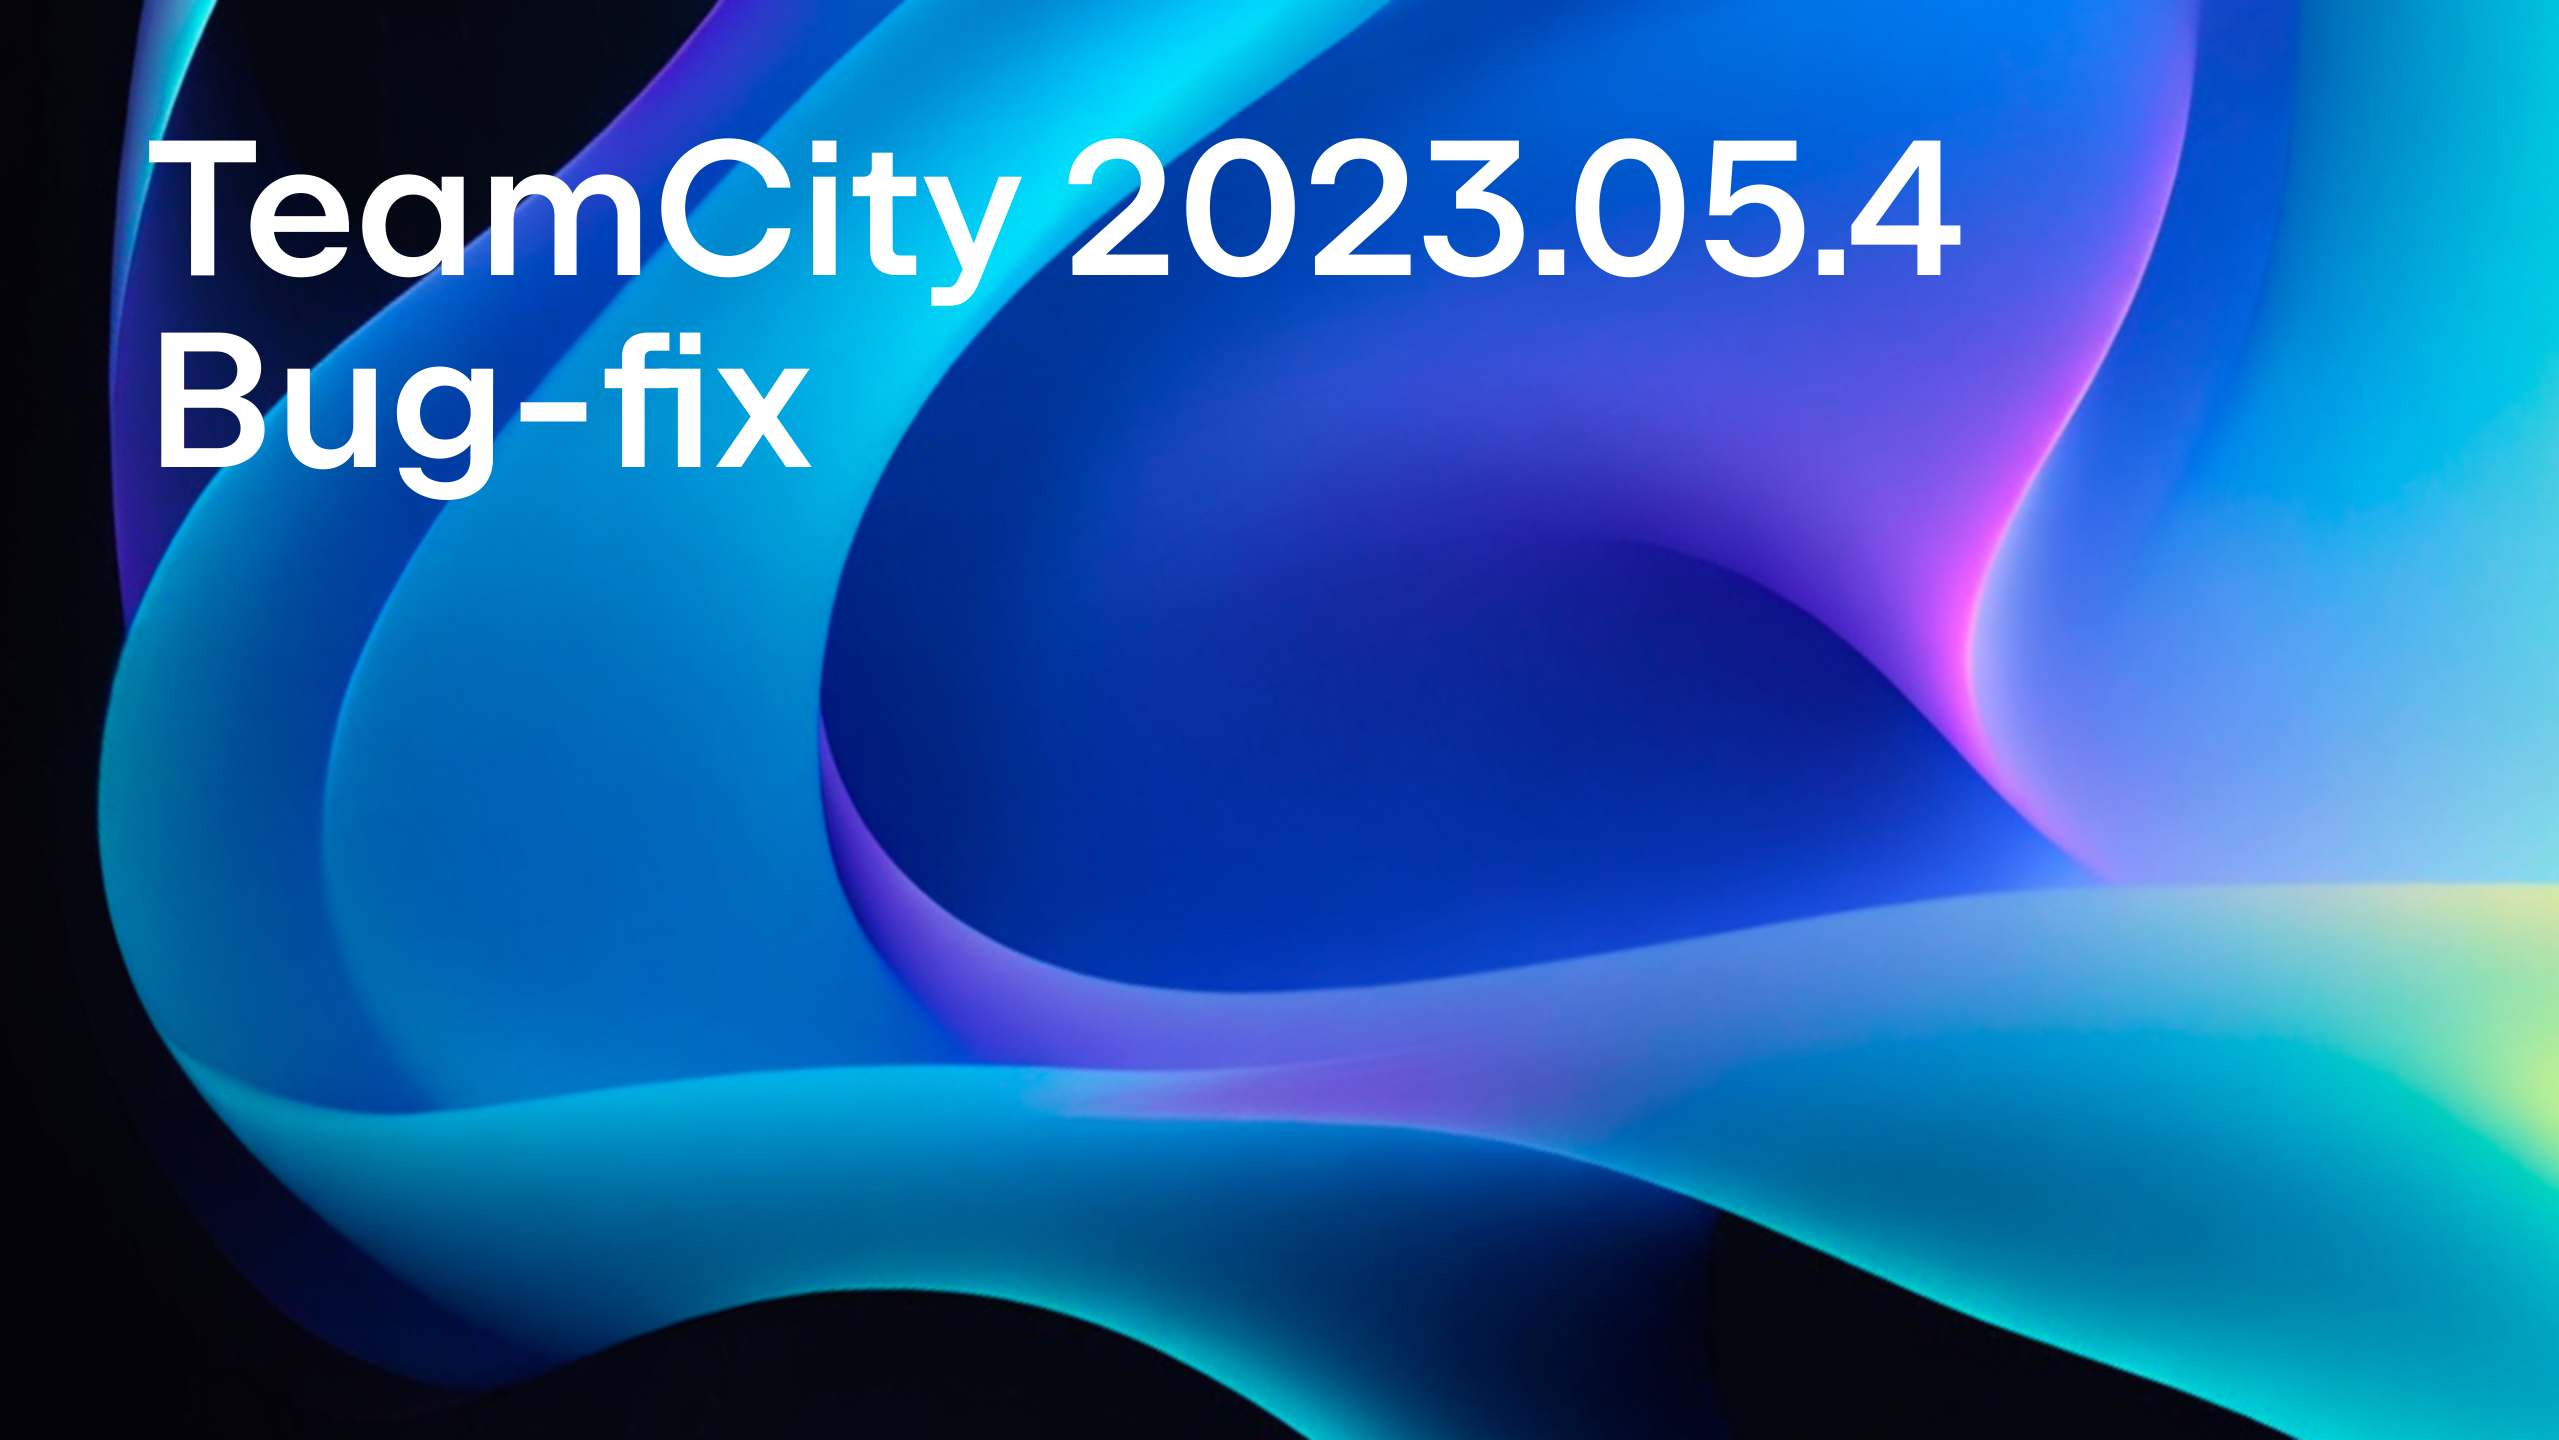 TeamCity 2023.05.4 featured image